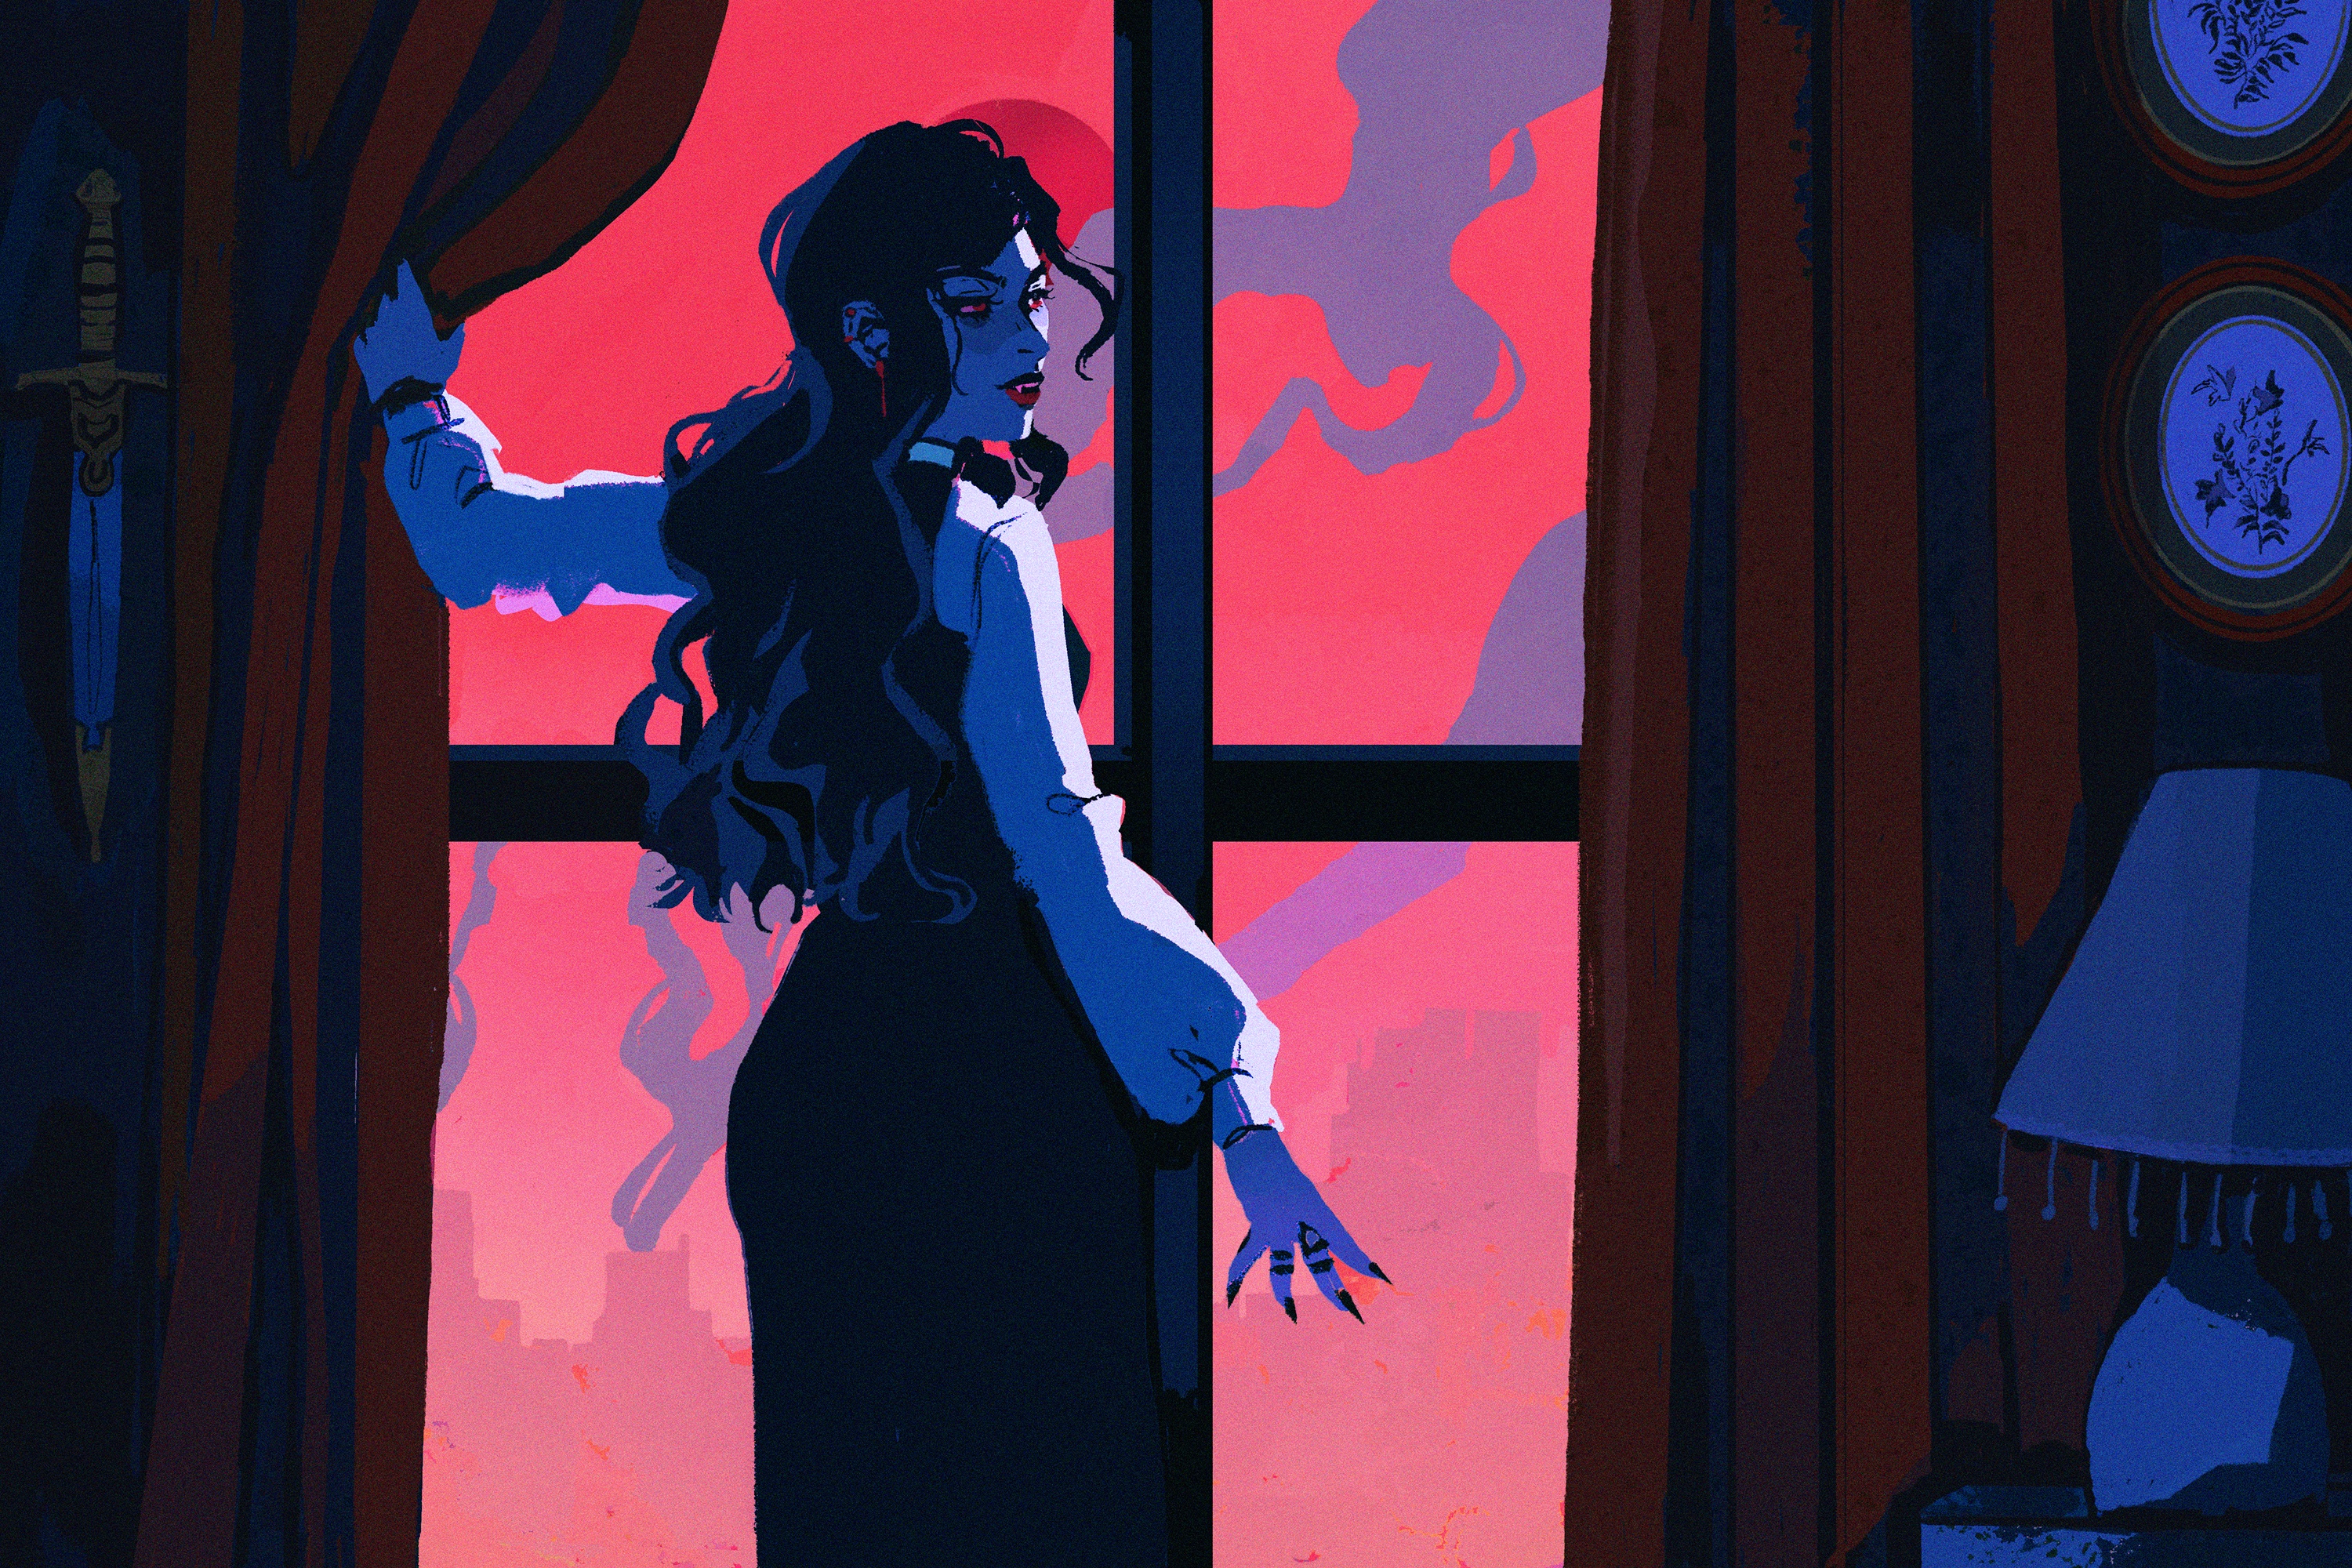 A vampire looks out a window at a red, smoke-filled sky